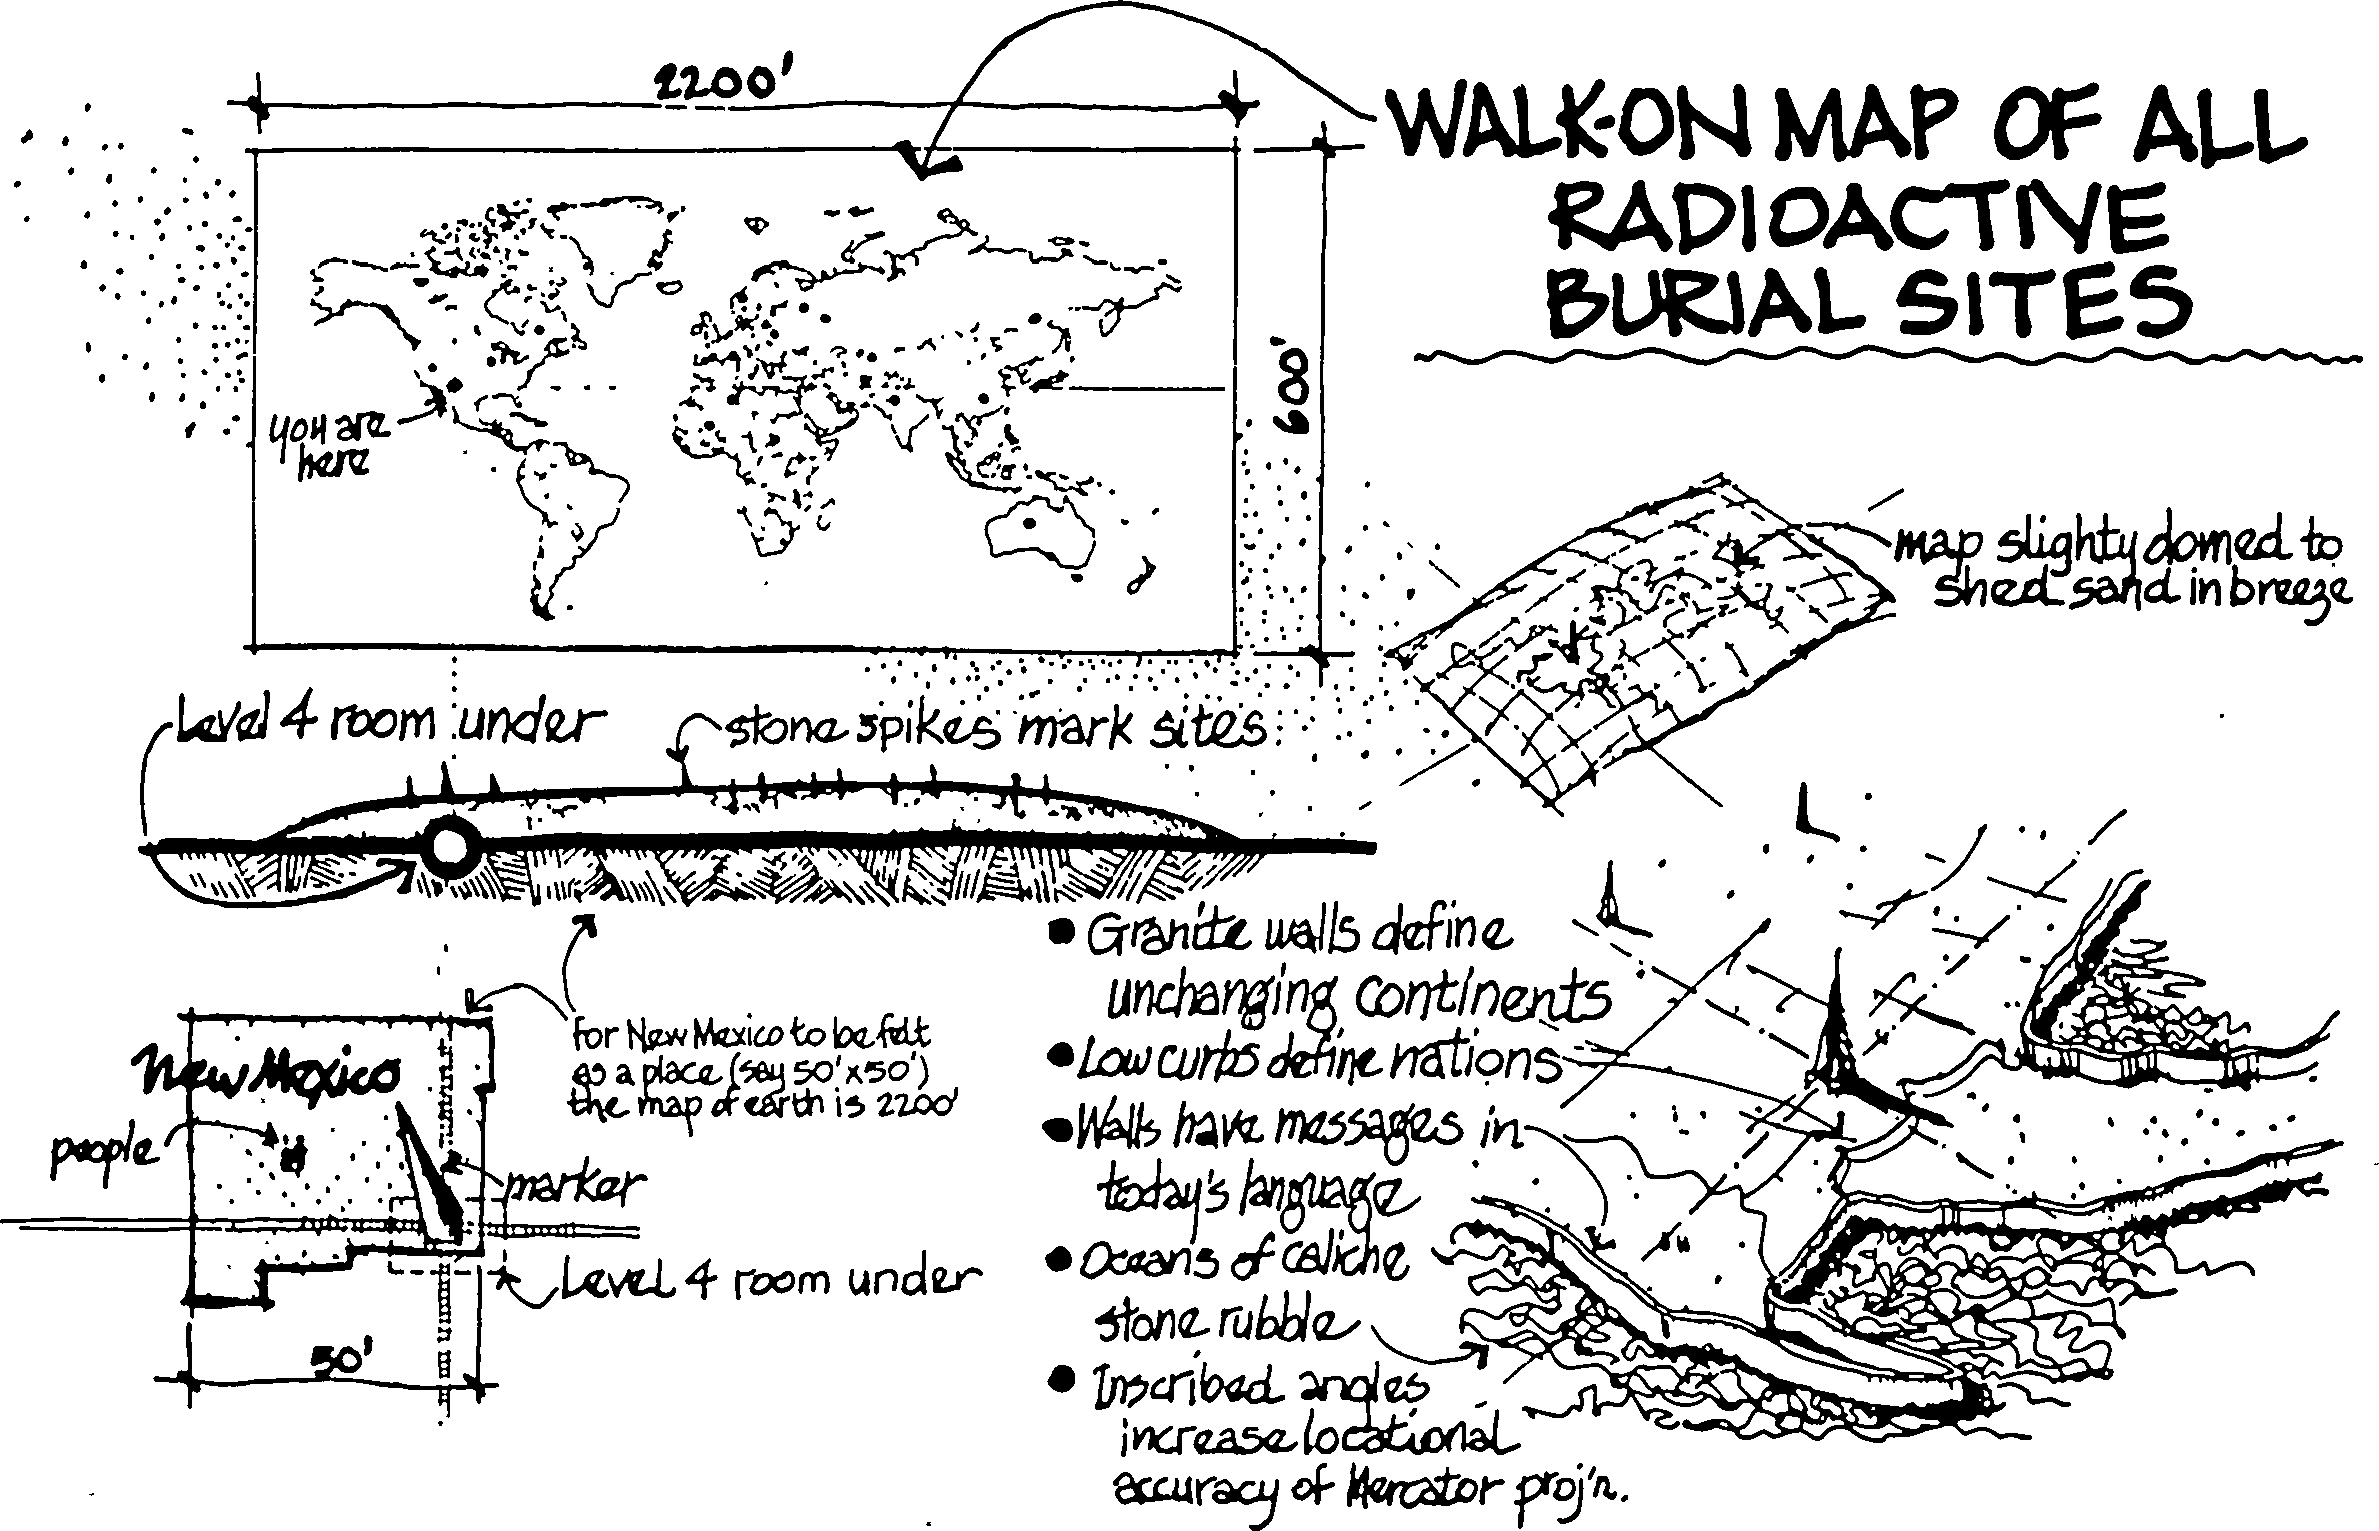 Sketch of a massive world map measuring 2,200 feet by 600 feet. The map is slightly domed to shed sand. The map bears walls to delineate geographical boundaries, which also carry messages. Spikes mark locations of the WIPP site as well as other sites. Under the WIPP marker is the Level 4 Room.